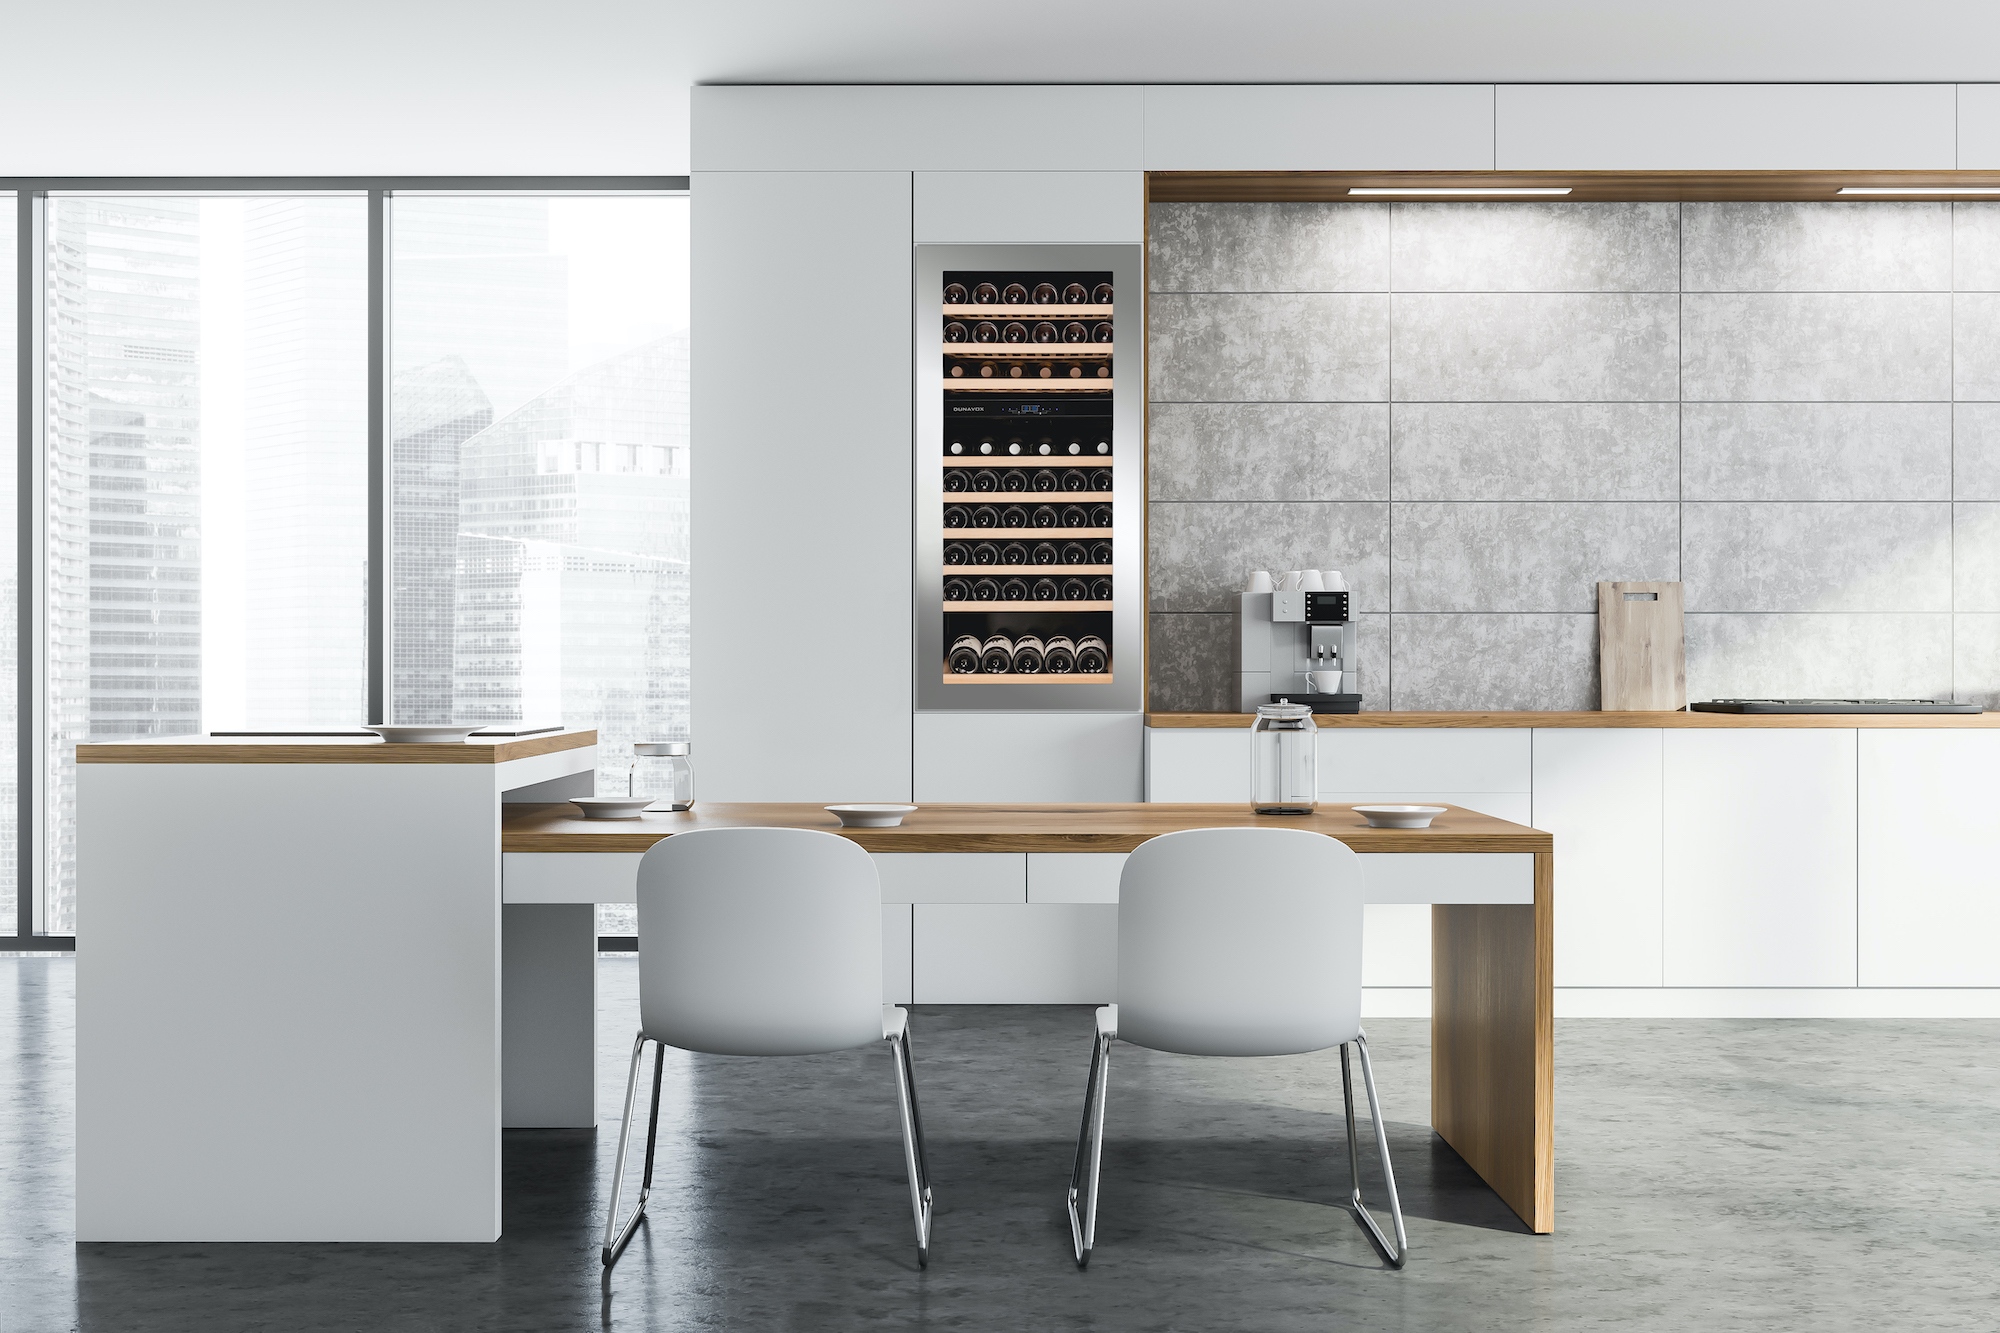 Dunavox presents its Push-to-open wine cabinets